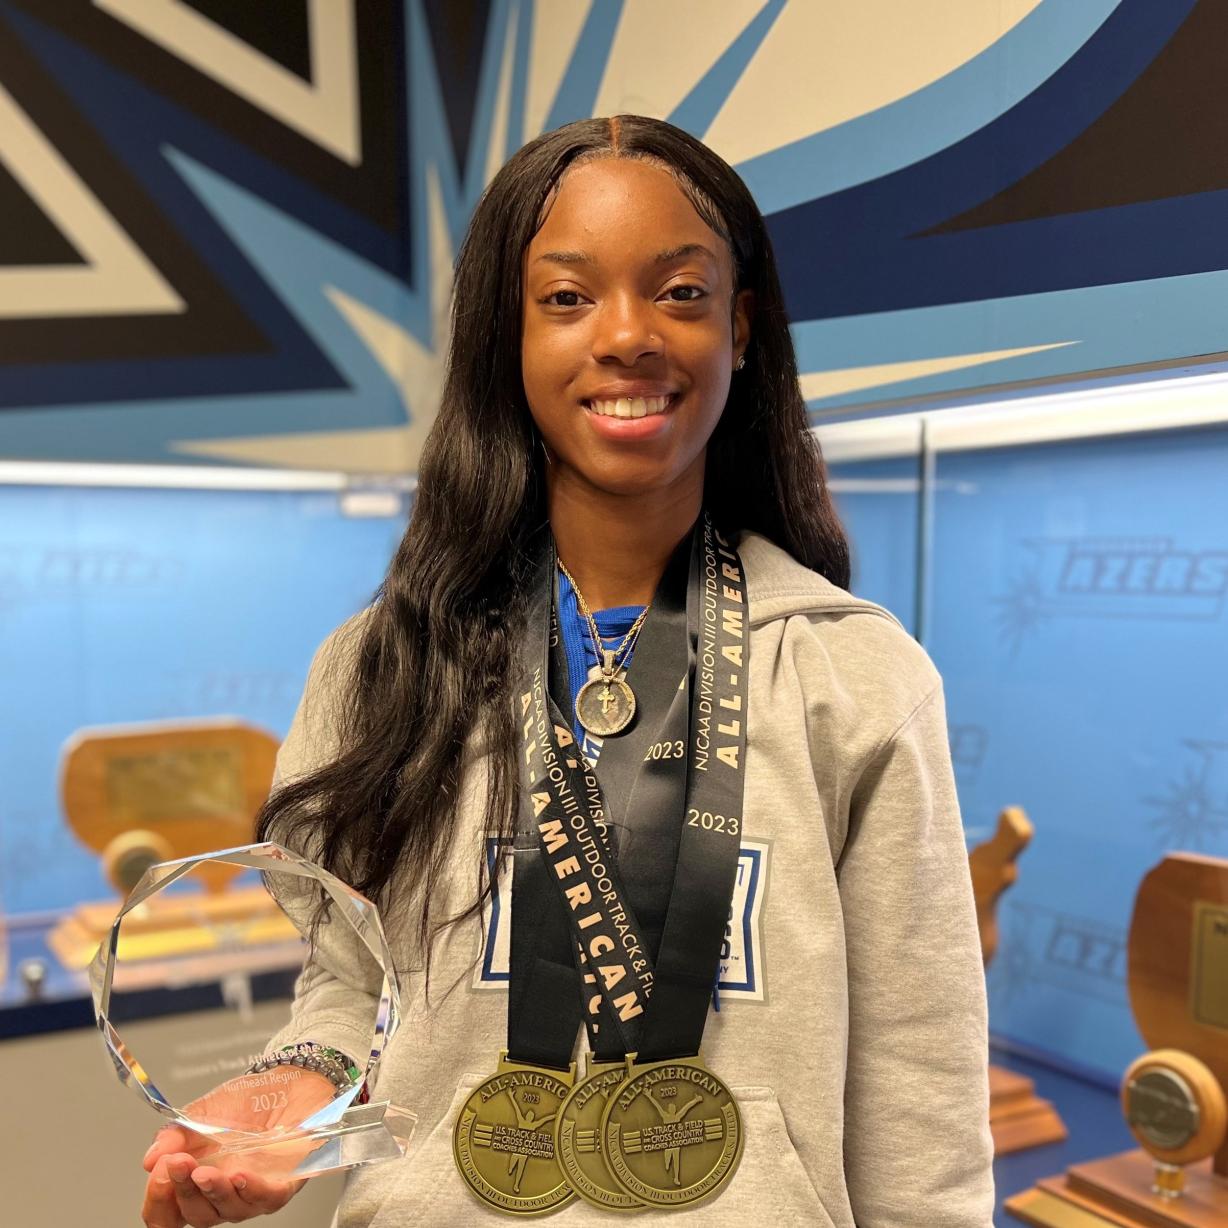 Karizma Brathwaite won three national titles and was named the NJCAA Division III Outdoor Track & Field Women's Track Athlete of the Year.